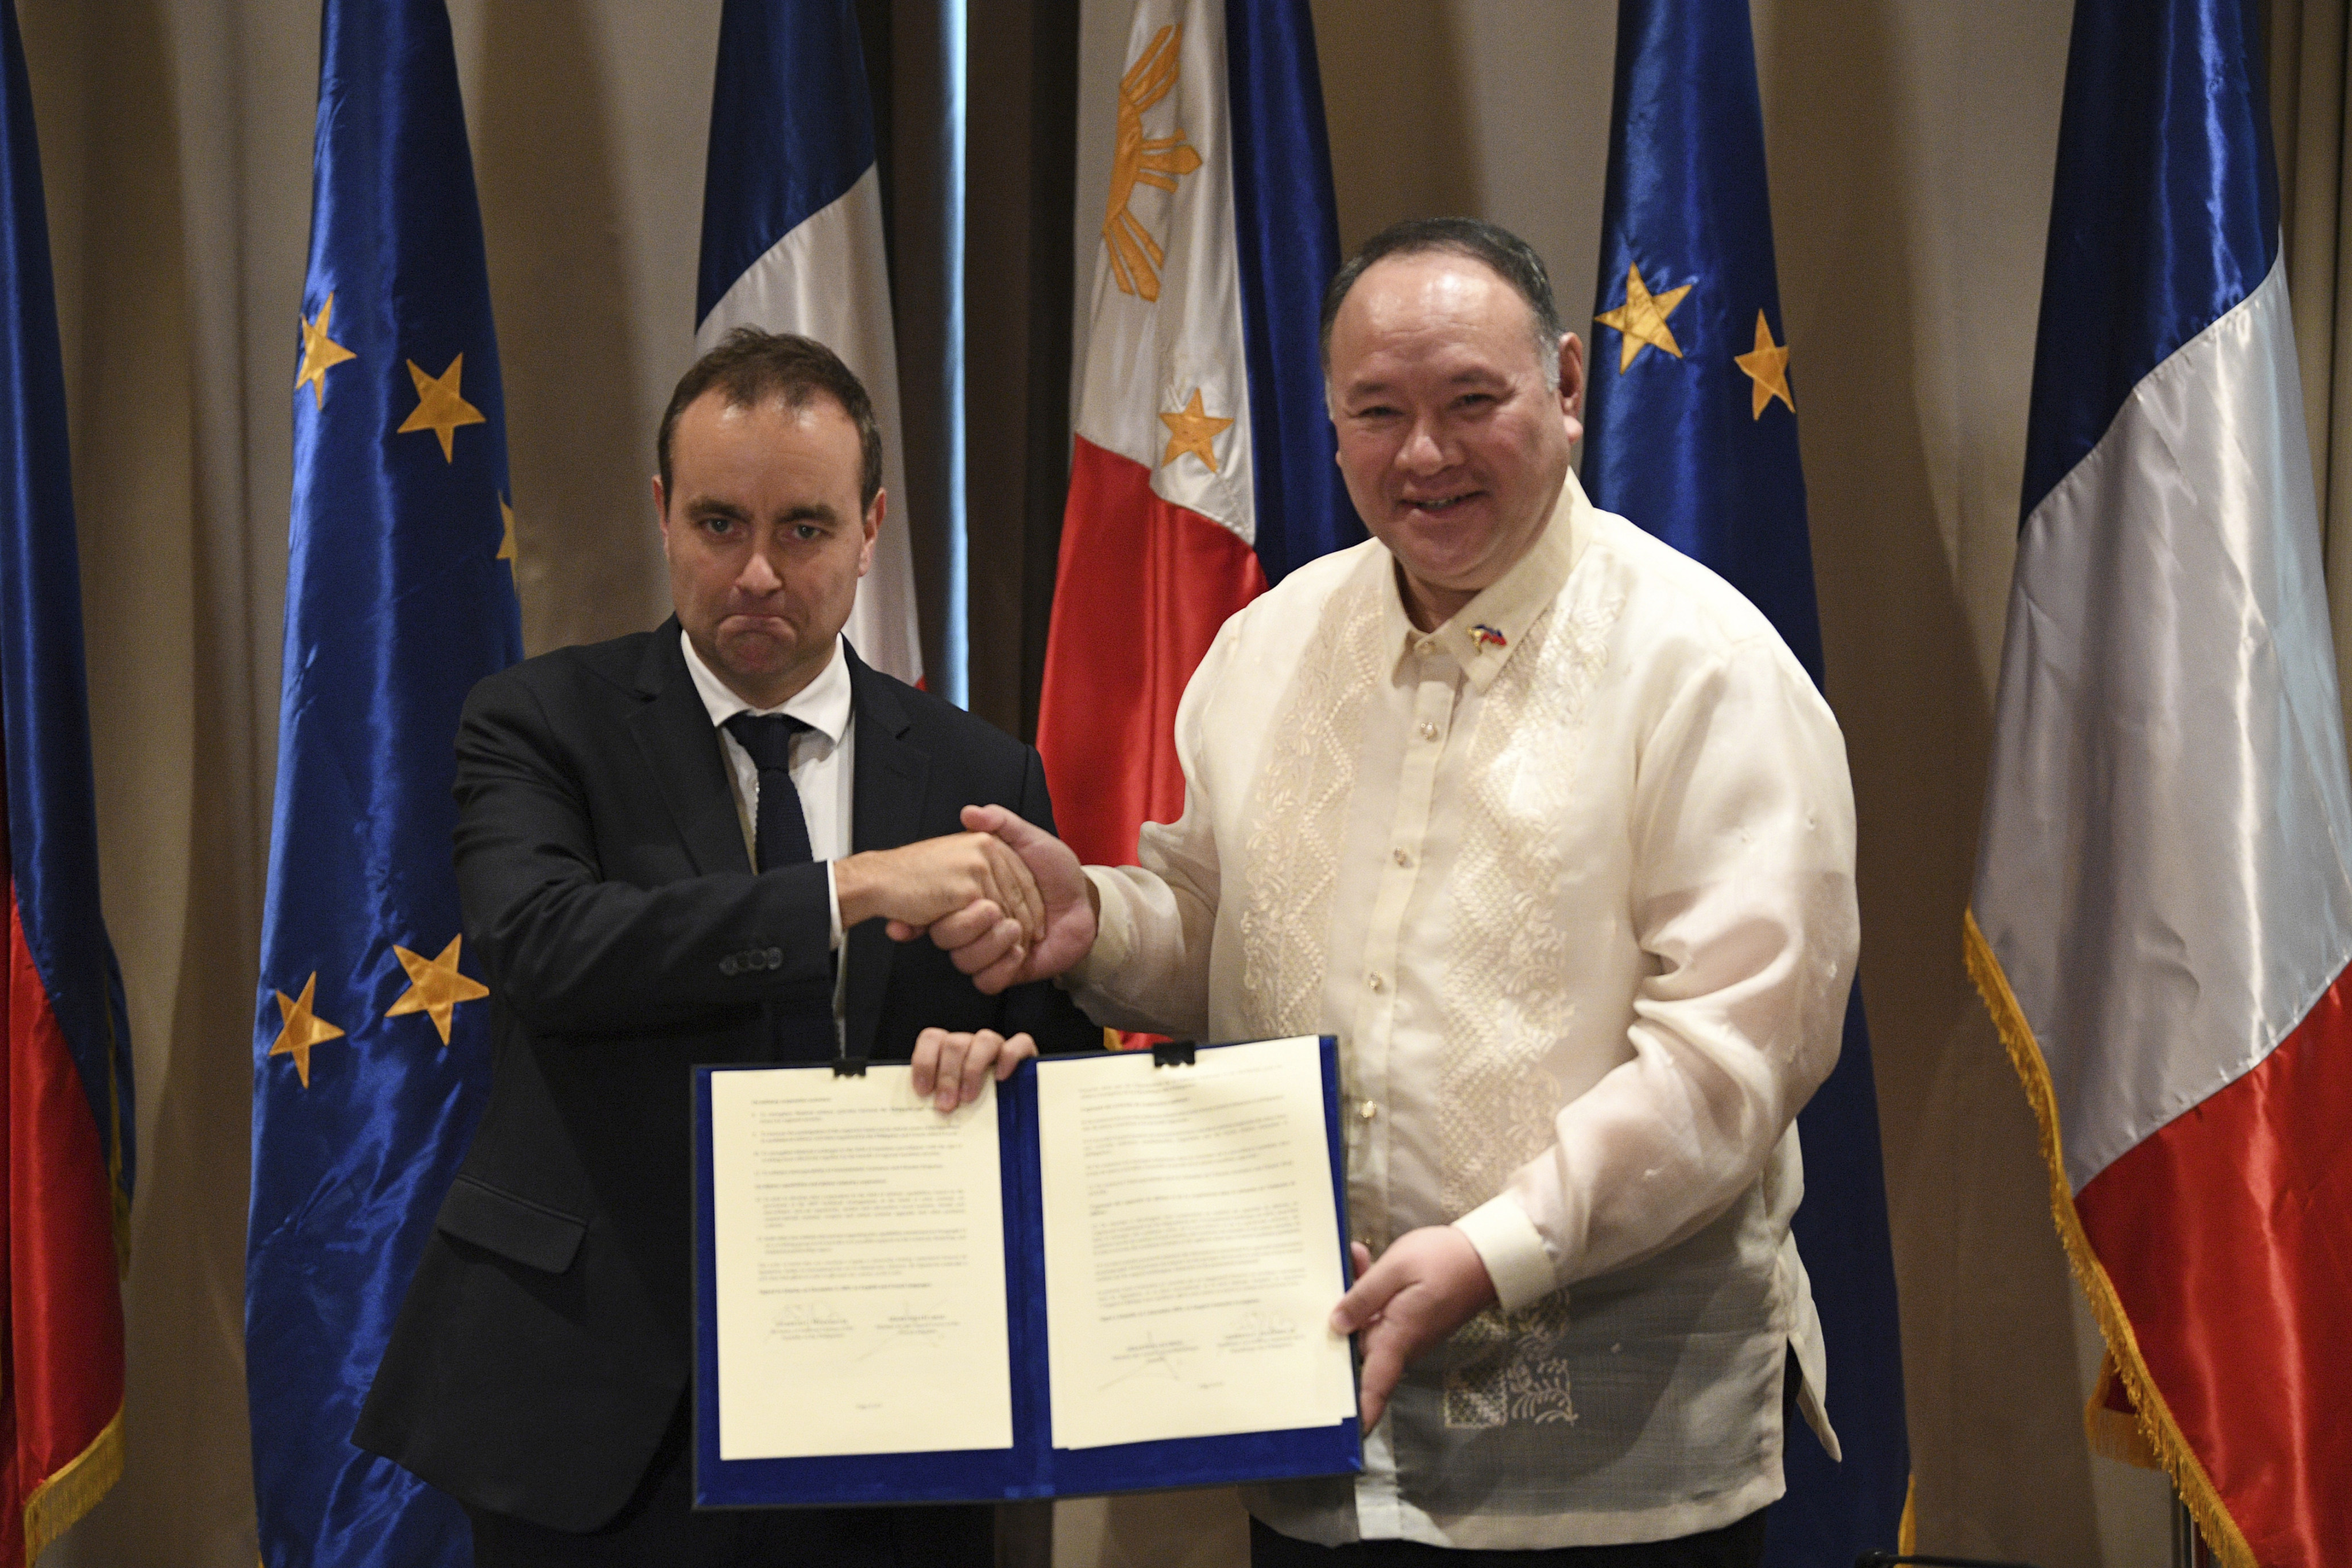 French Defence Minister Sebastien Lecornu (left) shakes hands with his Philippine counterpart Secretary Gilberto Teodoro as they hold a document during a joint press conference at a hotel in Manila, Philippines on Saturday. Photo: Pool via AP